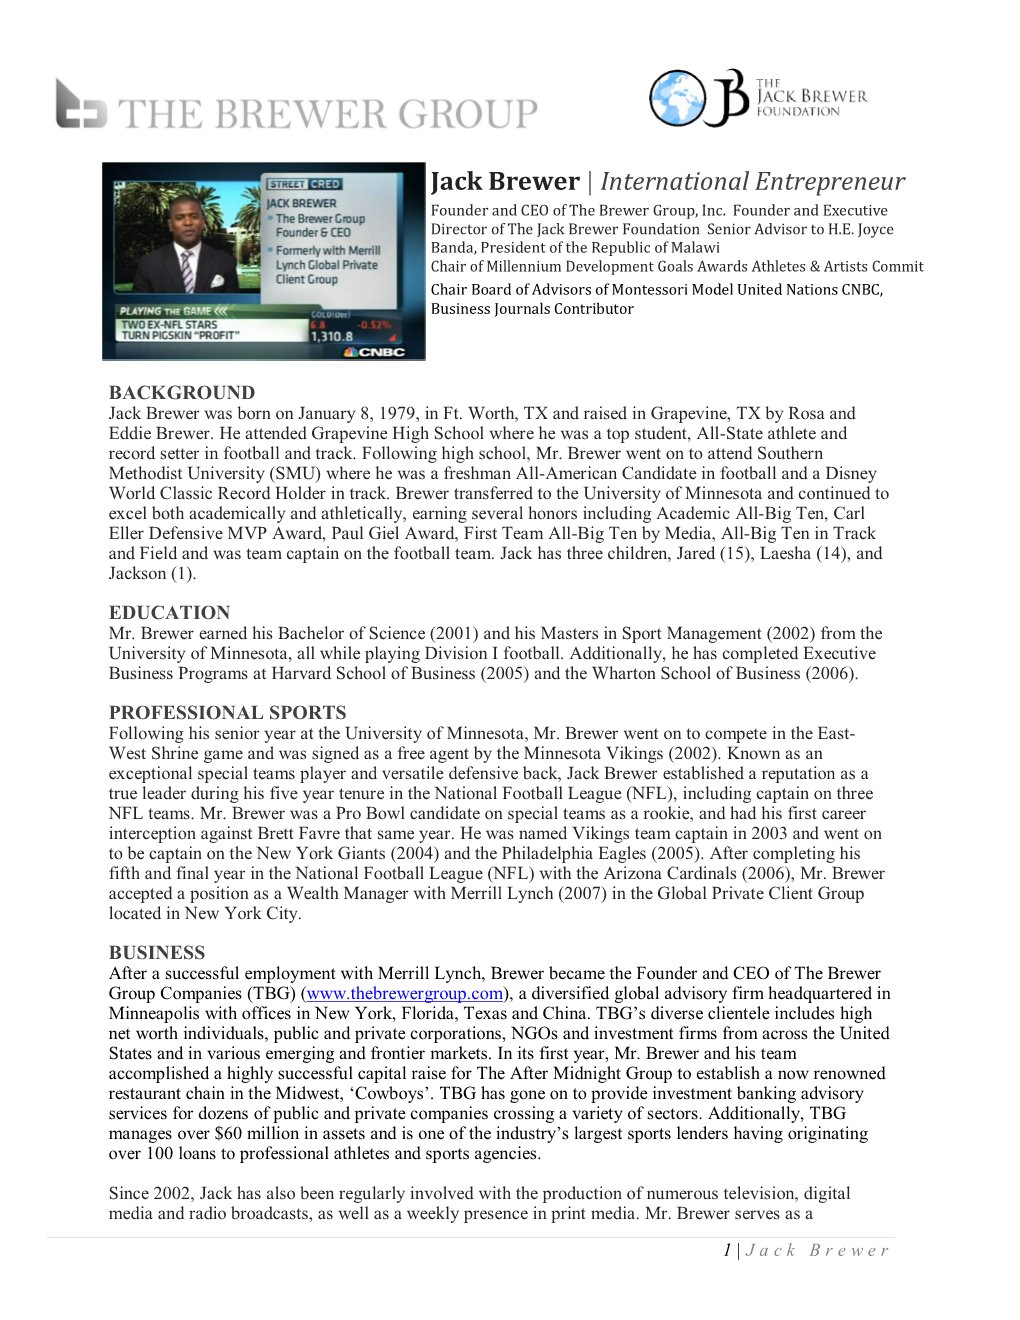 Jack Brewer | International Entrepreneur Founder and CEO of the Brewer Group, Inc